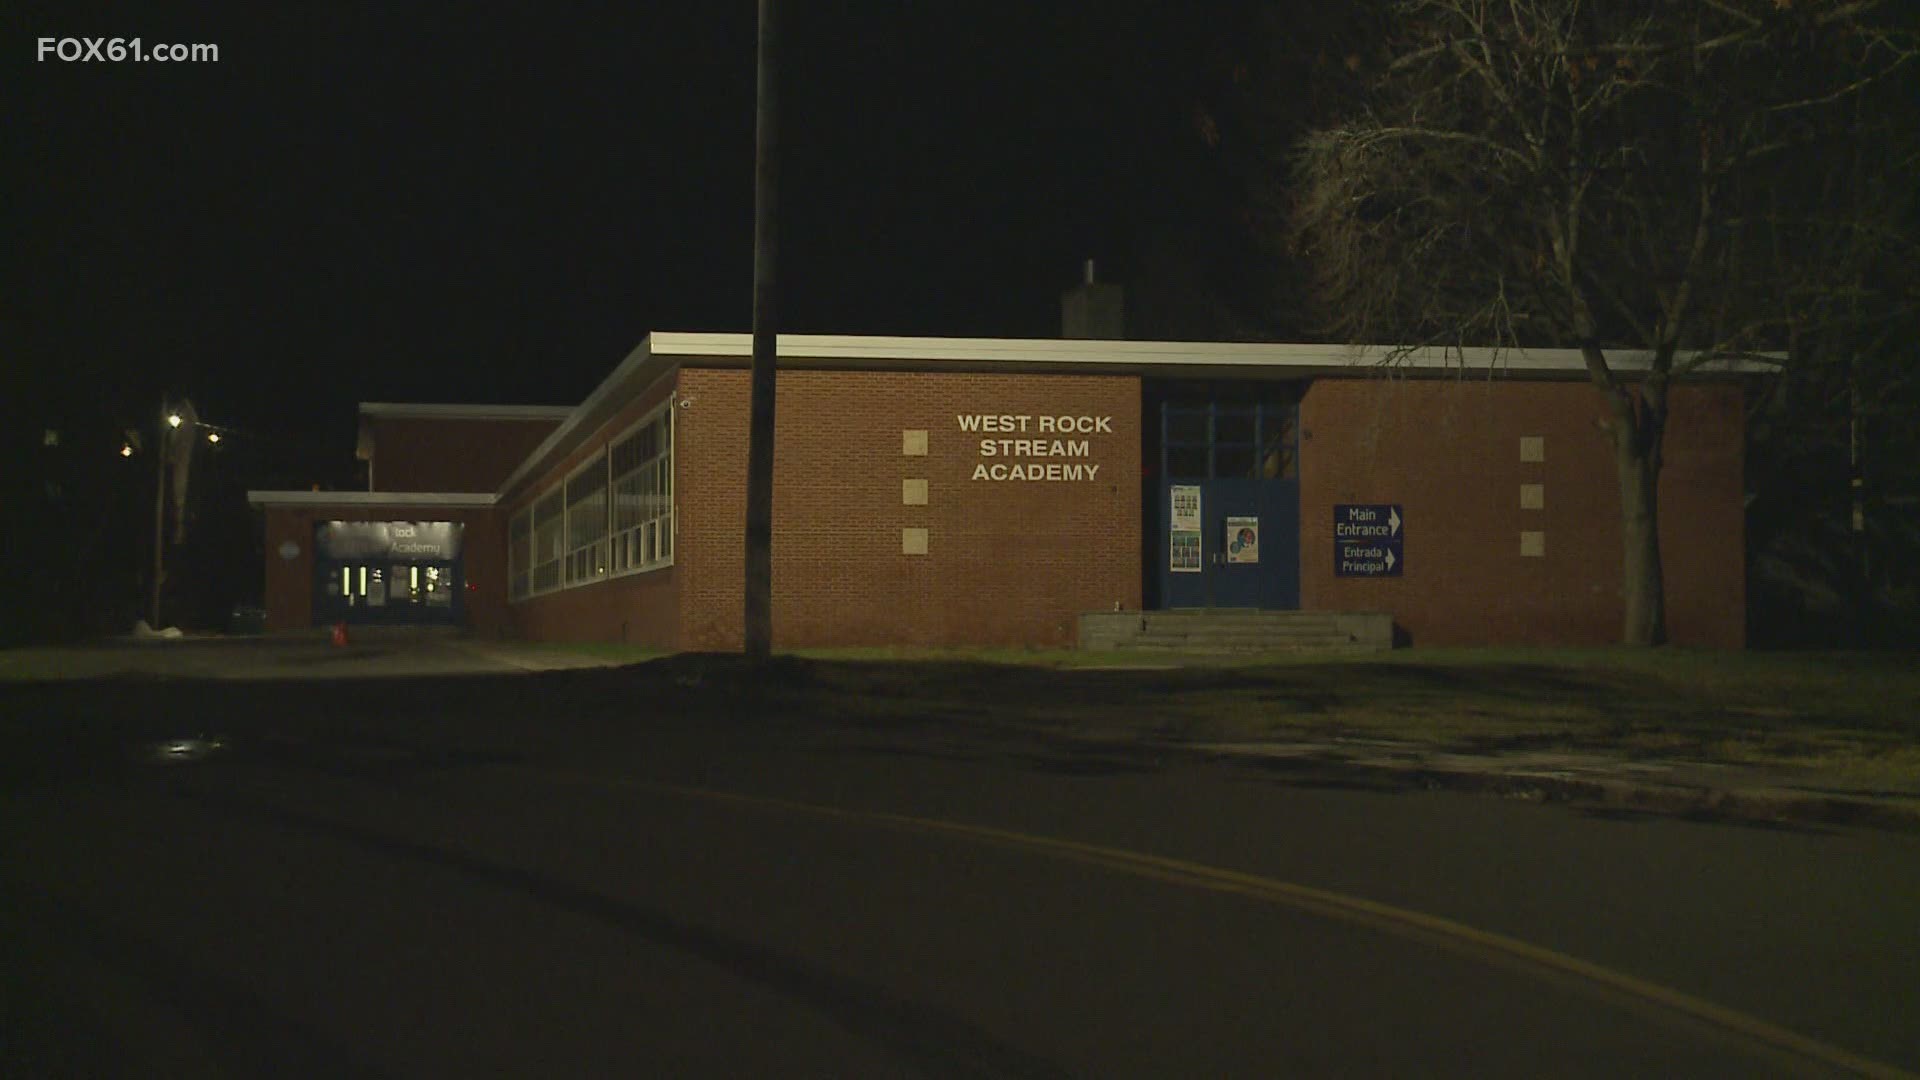 Two schools were deemed unsafe for reopening.